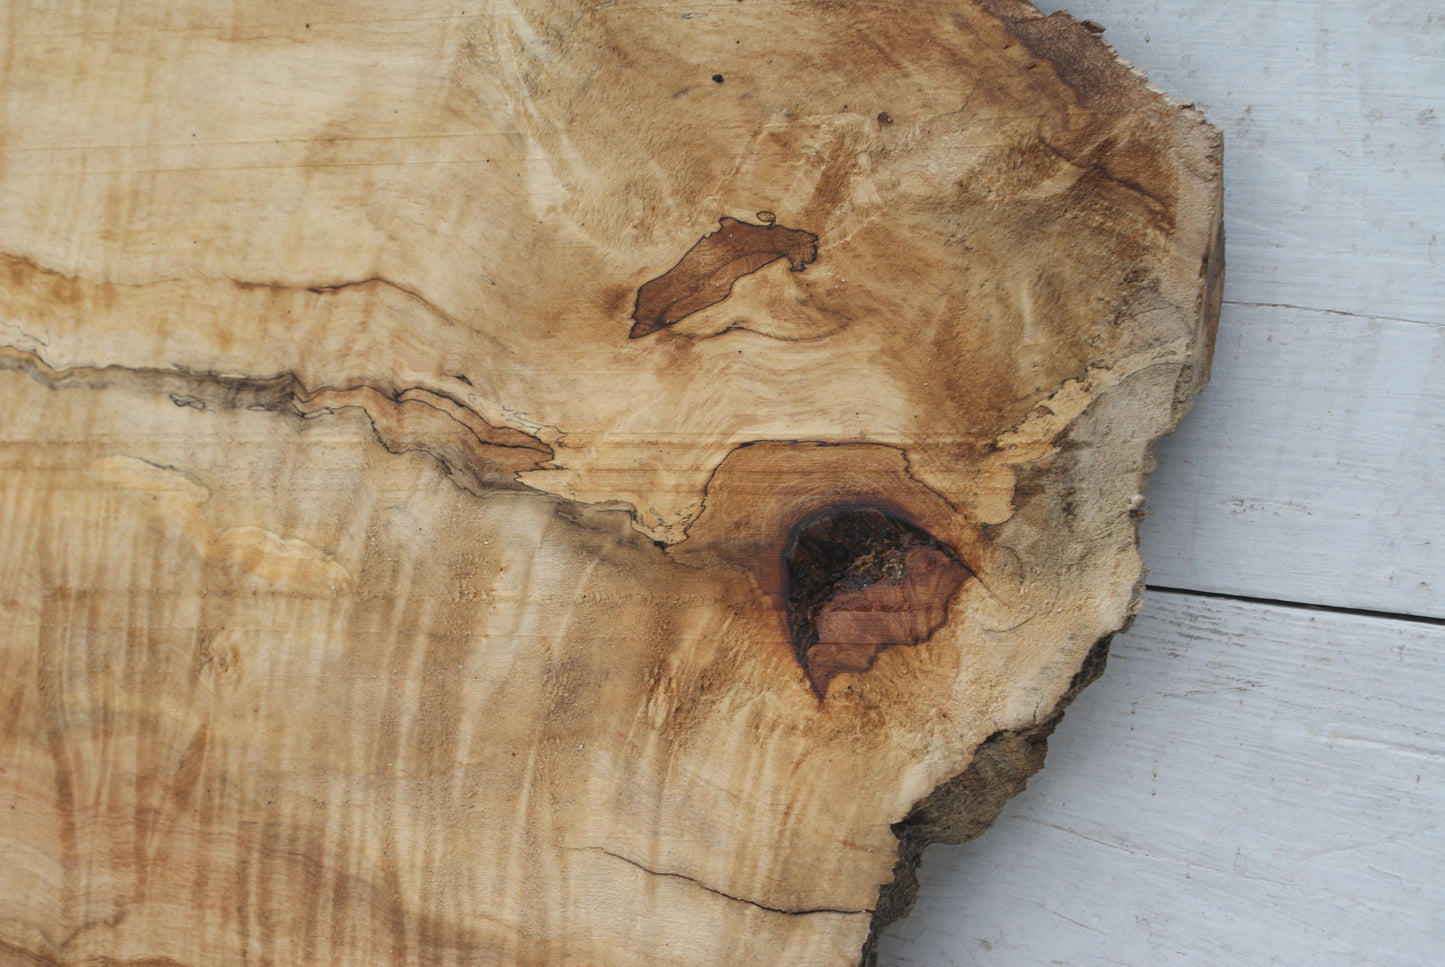 Spalted Rippled Sycamore 1155 L x 473 - 350 W x 49 D (mm) (460)